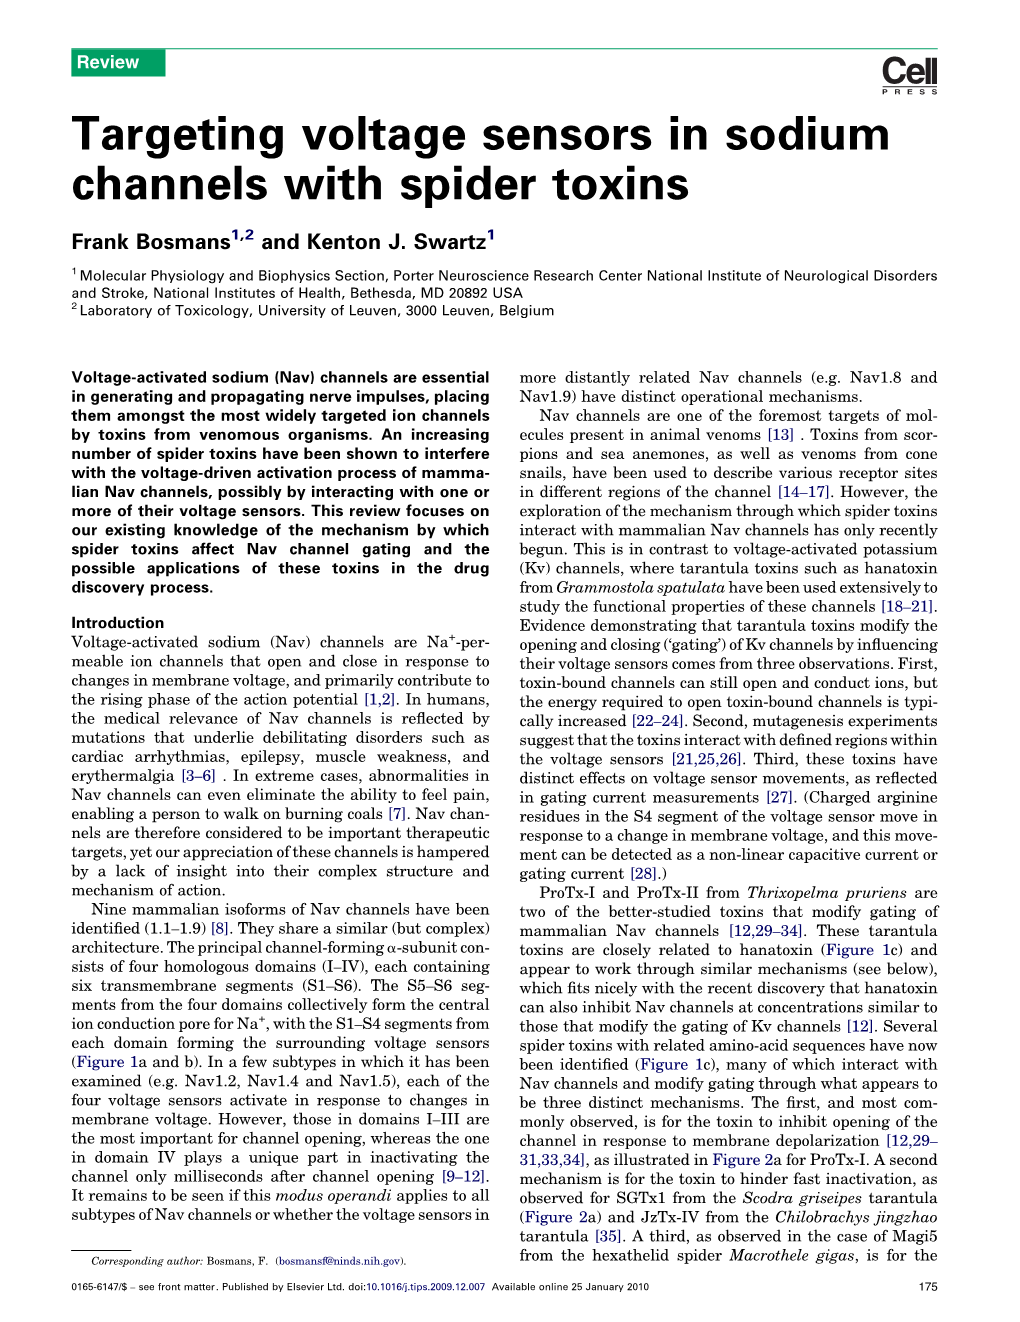 Targeting Voltage Sensors in Sodium Channels with Spider Toxins